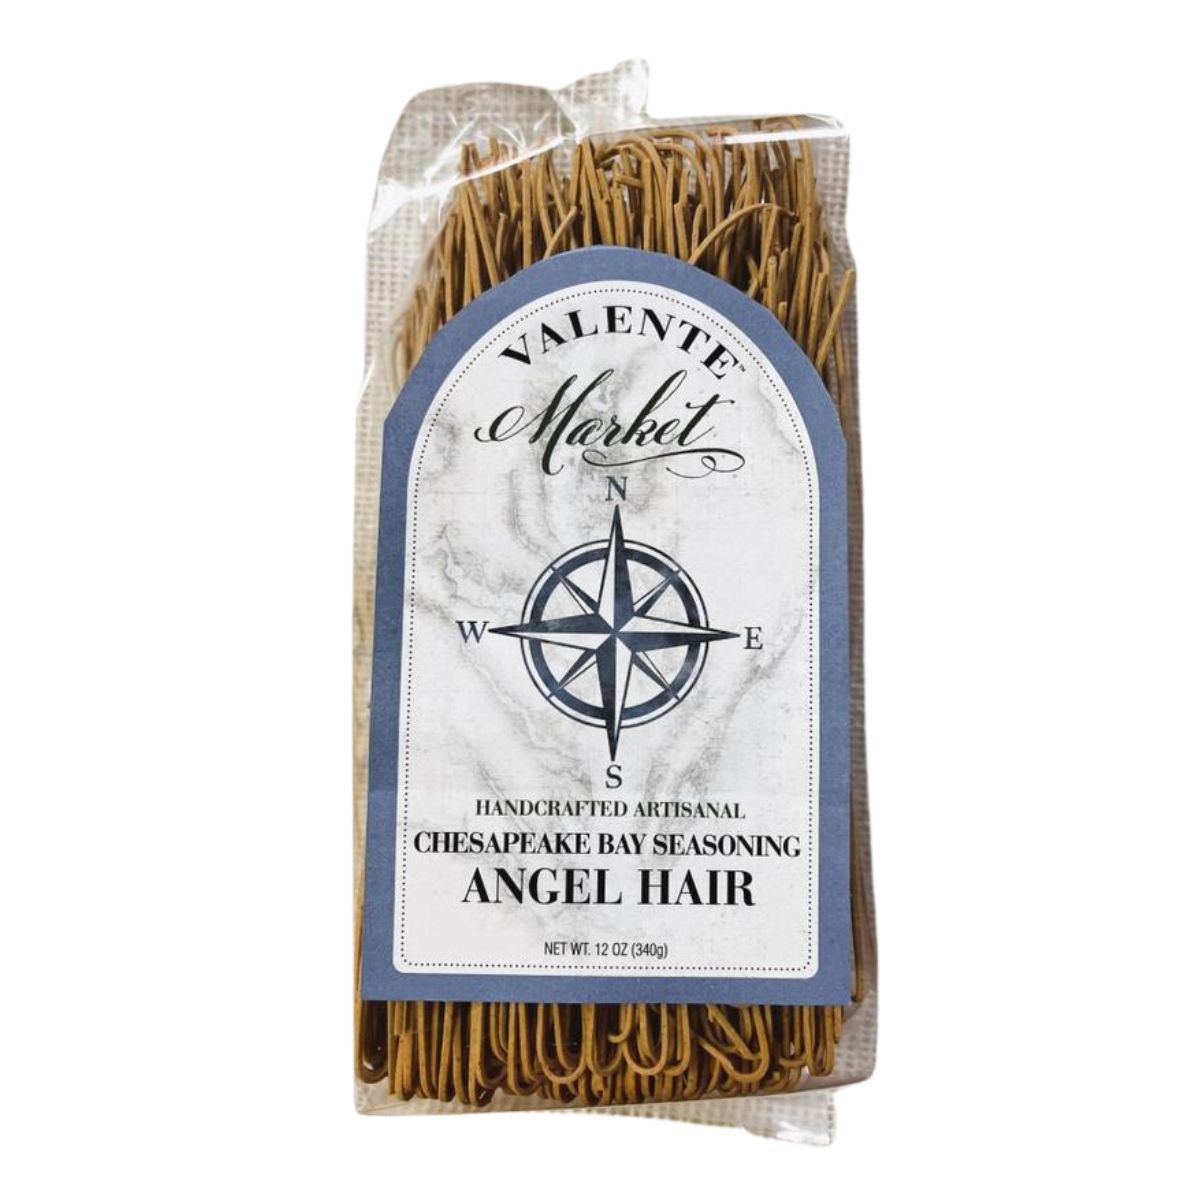 Chesapeake Bay Seasoning Angel Hair Pasta- Handcrafted Pasta, Delicious with shrimp